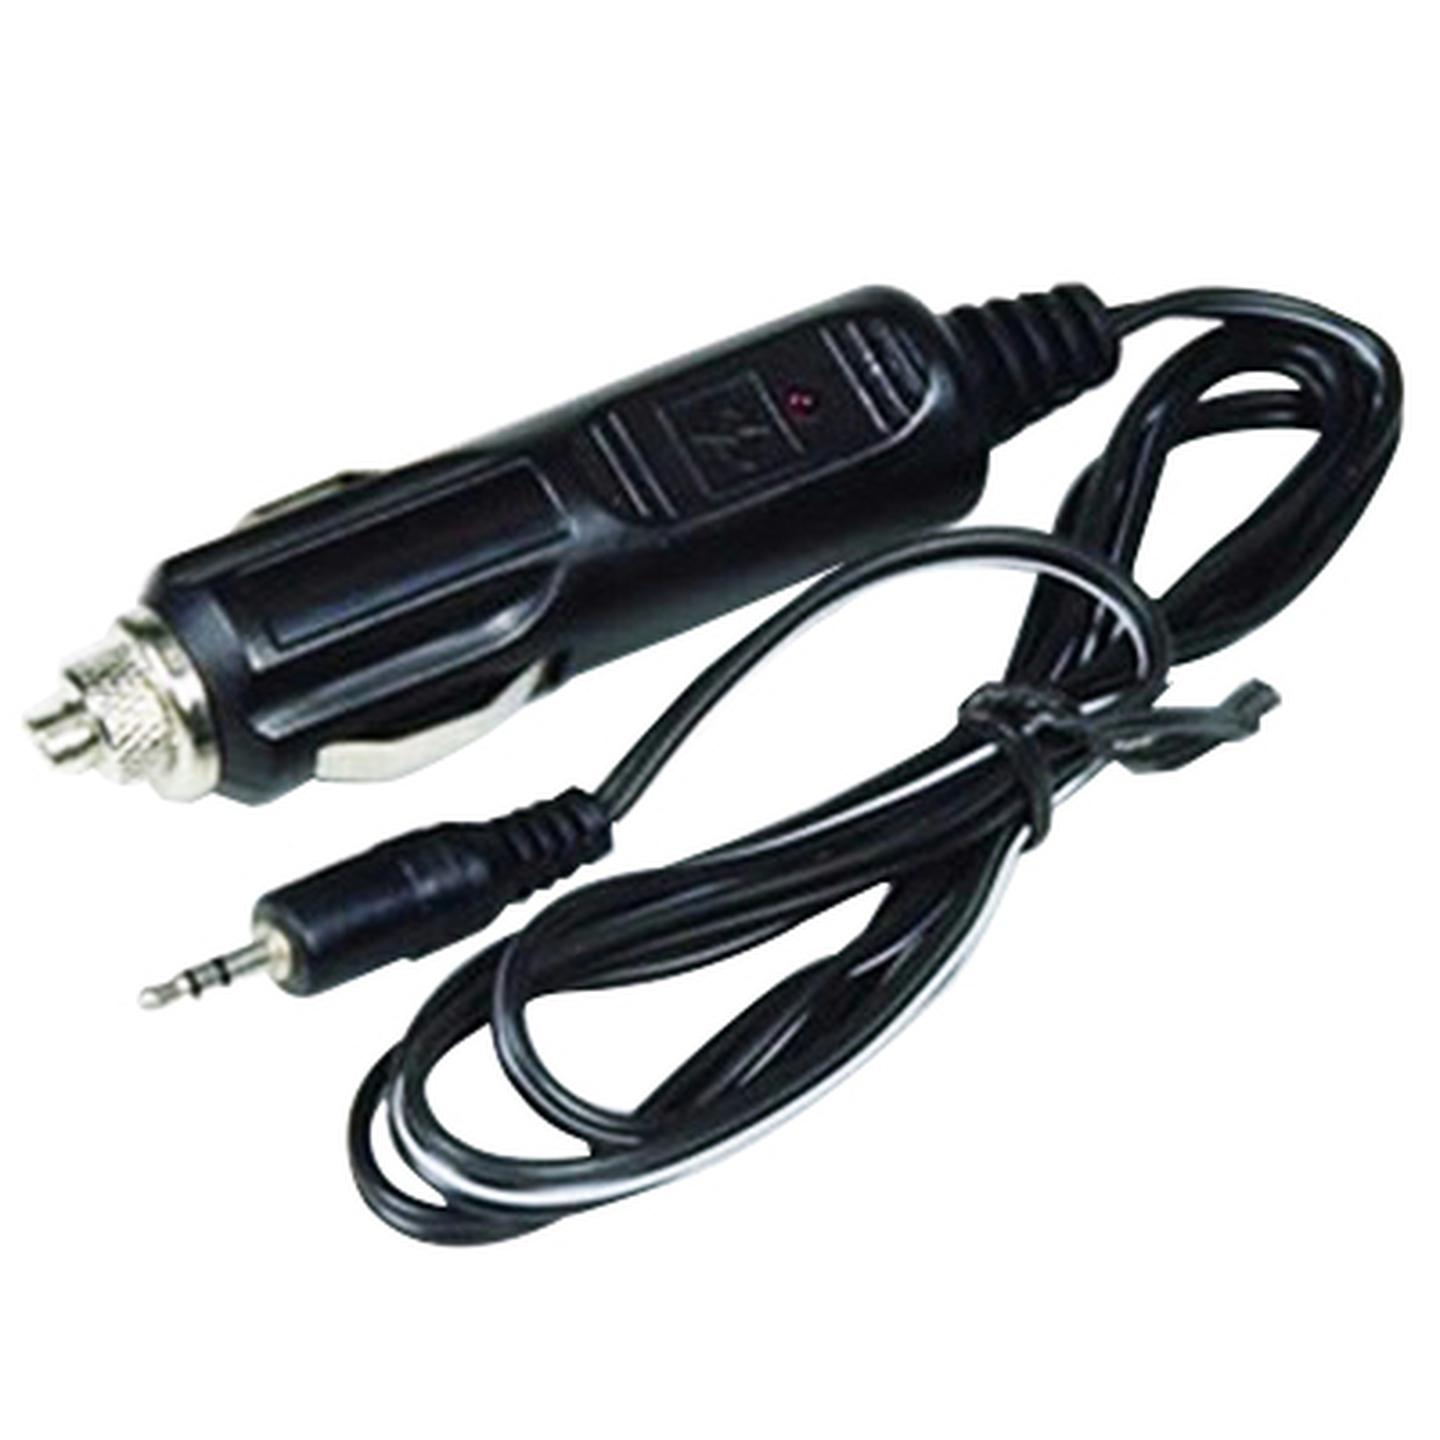 12V Car Charger to Suit DC1027